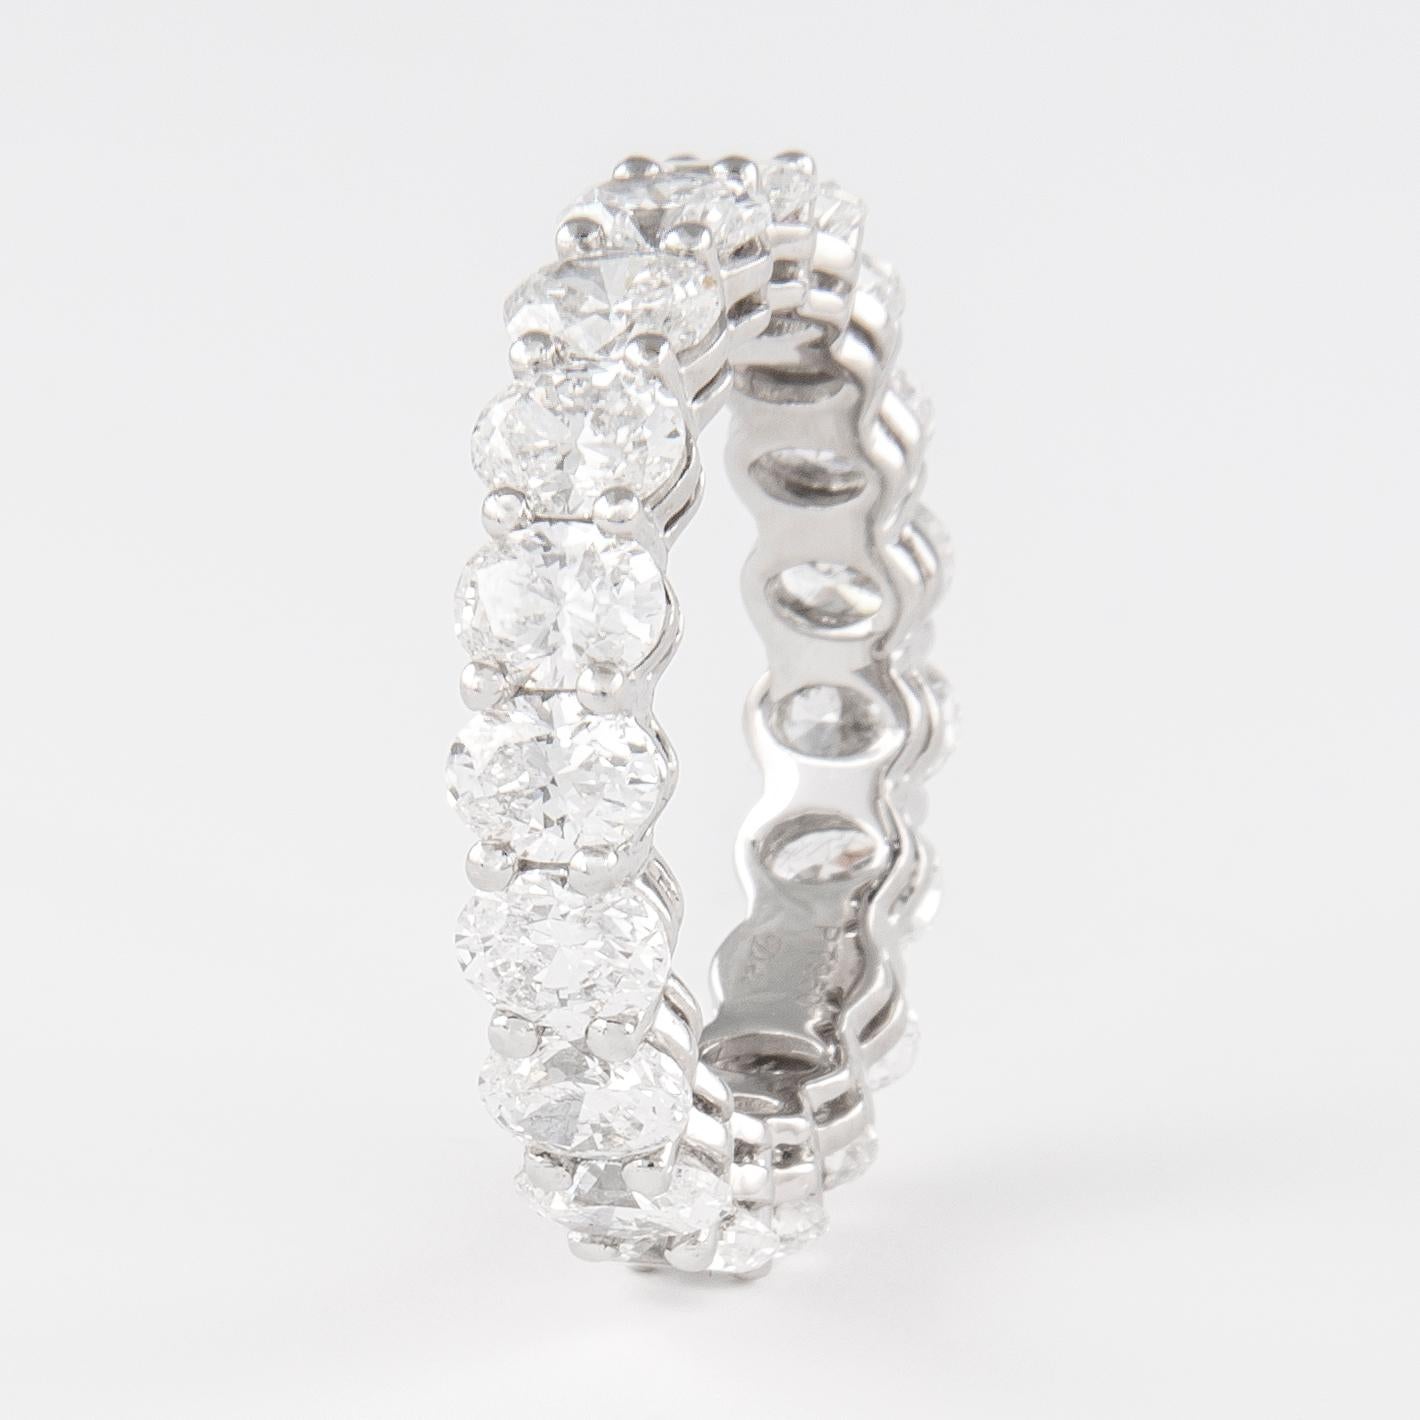 Stunning oval cut diamond eternity band, by Alexander Beverly Hills.
19 oval cut diamonds, 4.63 carats total. Approximately F color and VS clarity. Set in 18k white gold, 5.83 grams, size 6.75. 
Accommodated with an up-to-date appraisal by a GIA